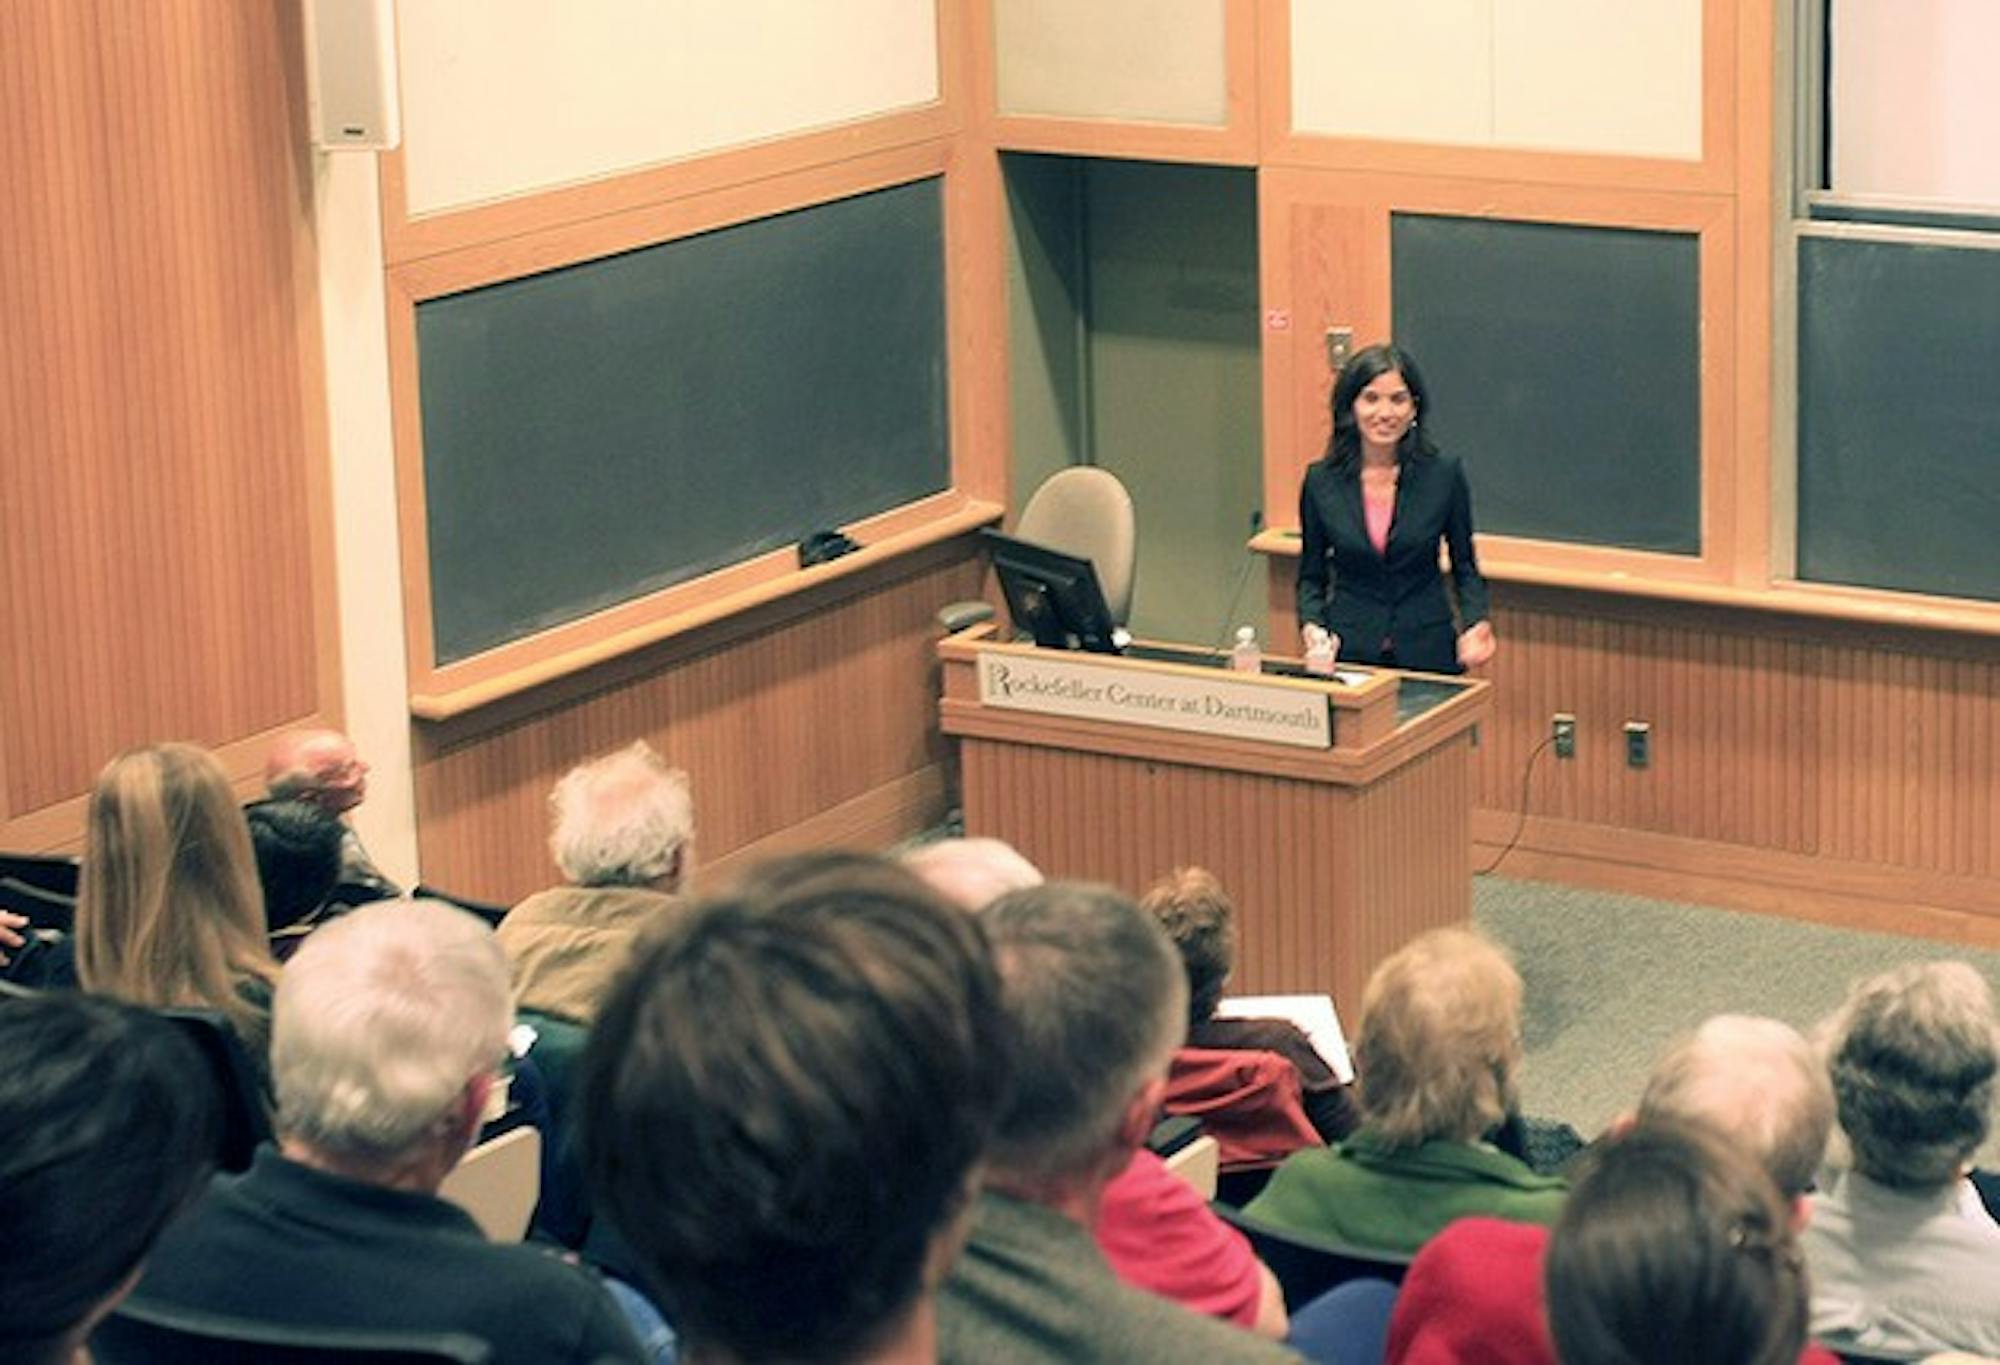 Swiss science journalist Samiha Shafy discussed the relationship between scientific and political issues in a Monday lecture at the Rockefeller Center.